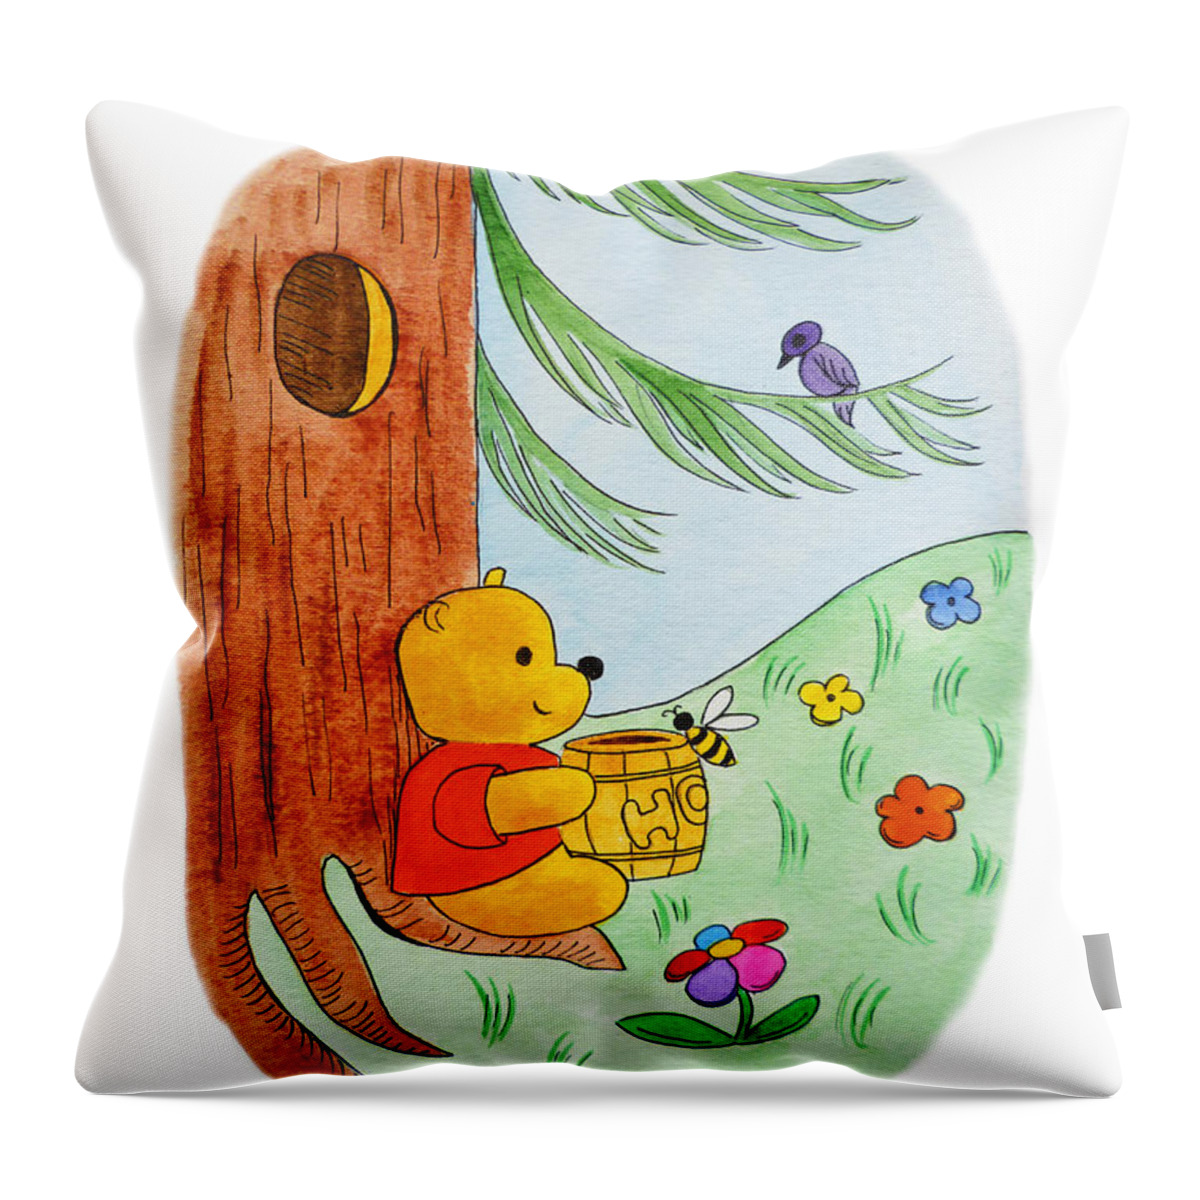 Winnie-the-pooh Throw Pillow featuring the painting Winnie The Pooh and His Lunch #2 by Irina Sztukowski